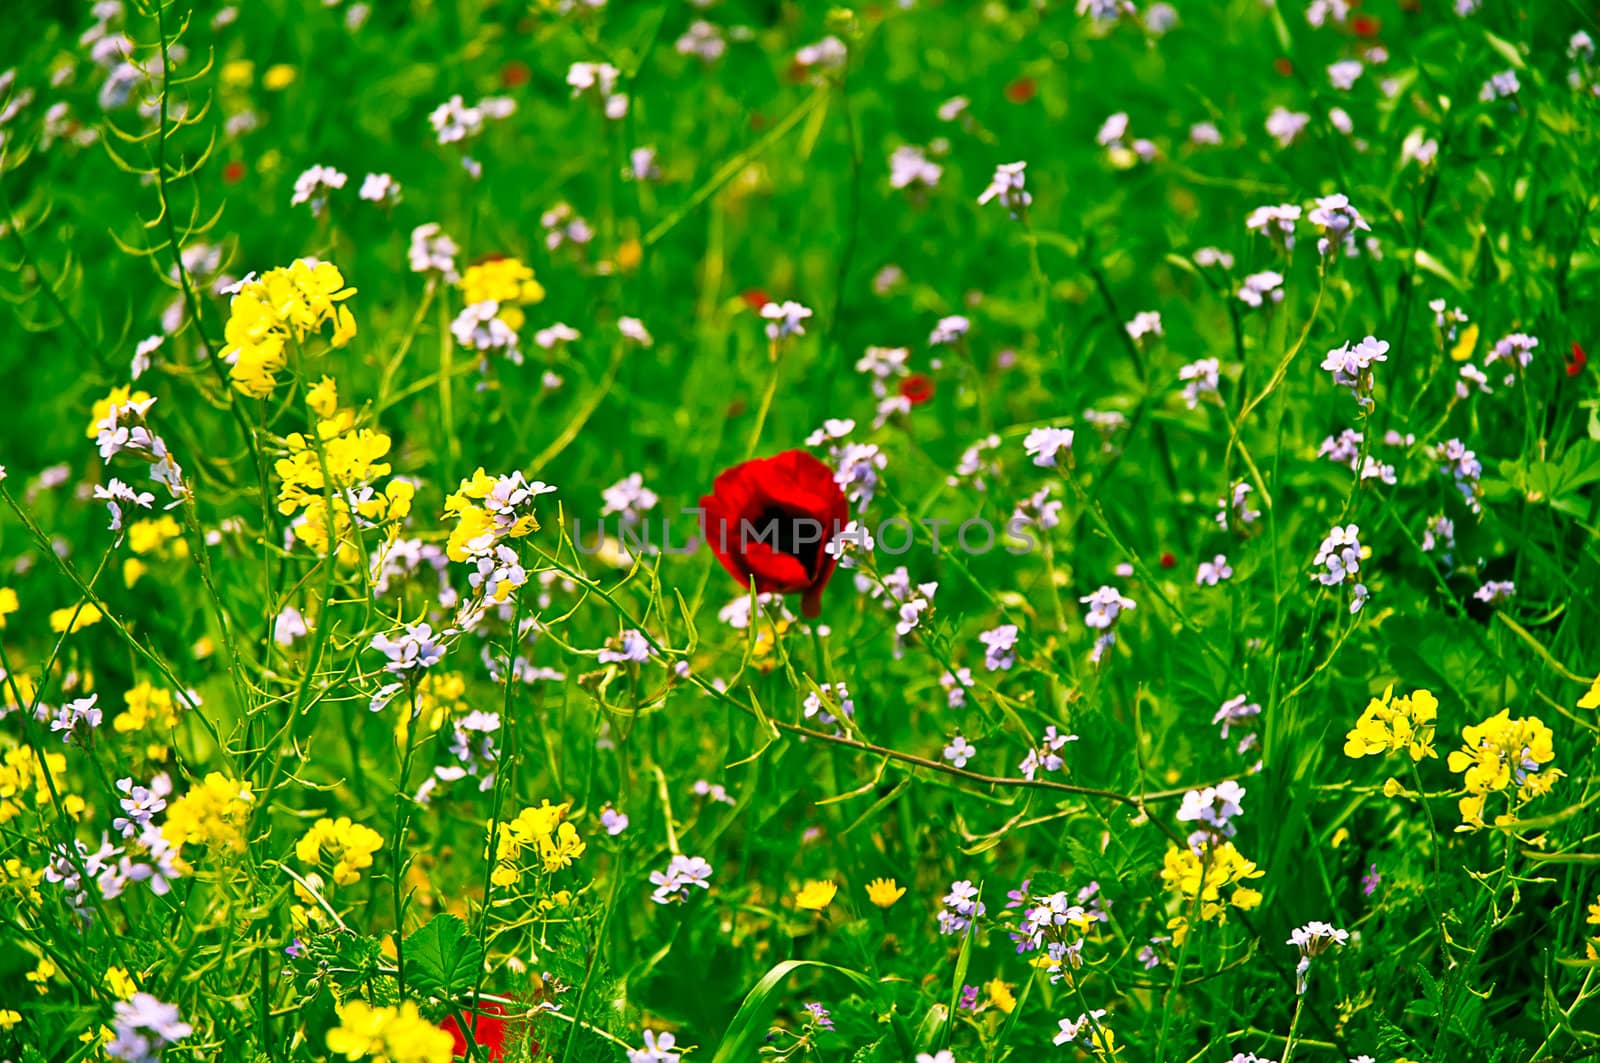 Wild poppies blooming and wildflowers
  in the field.